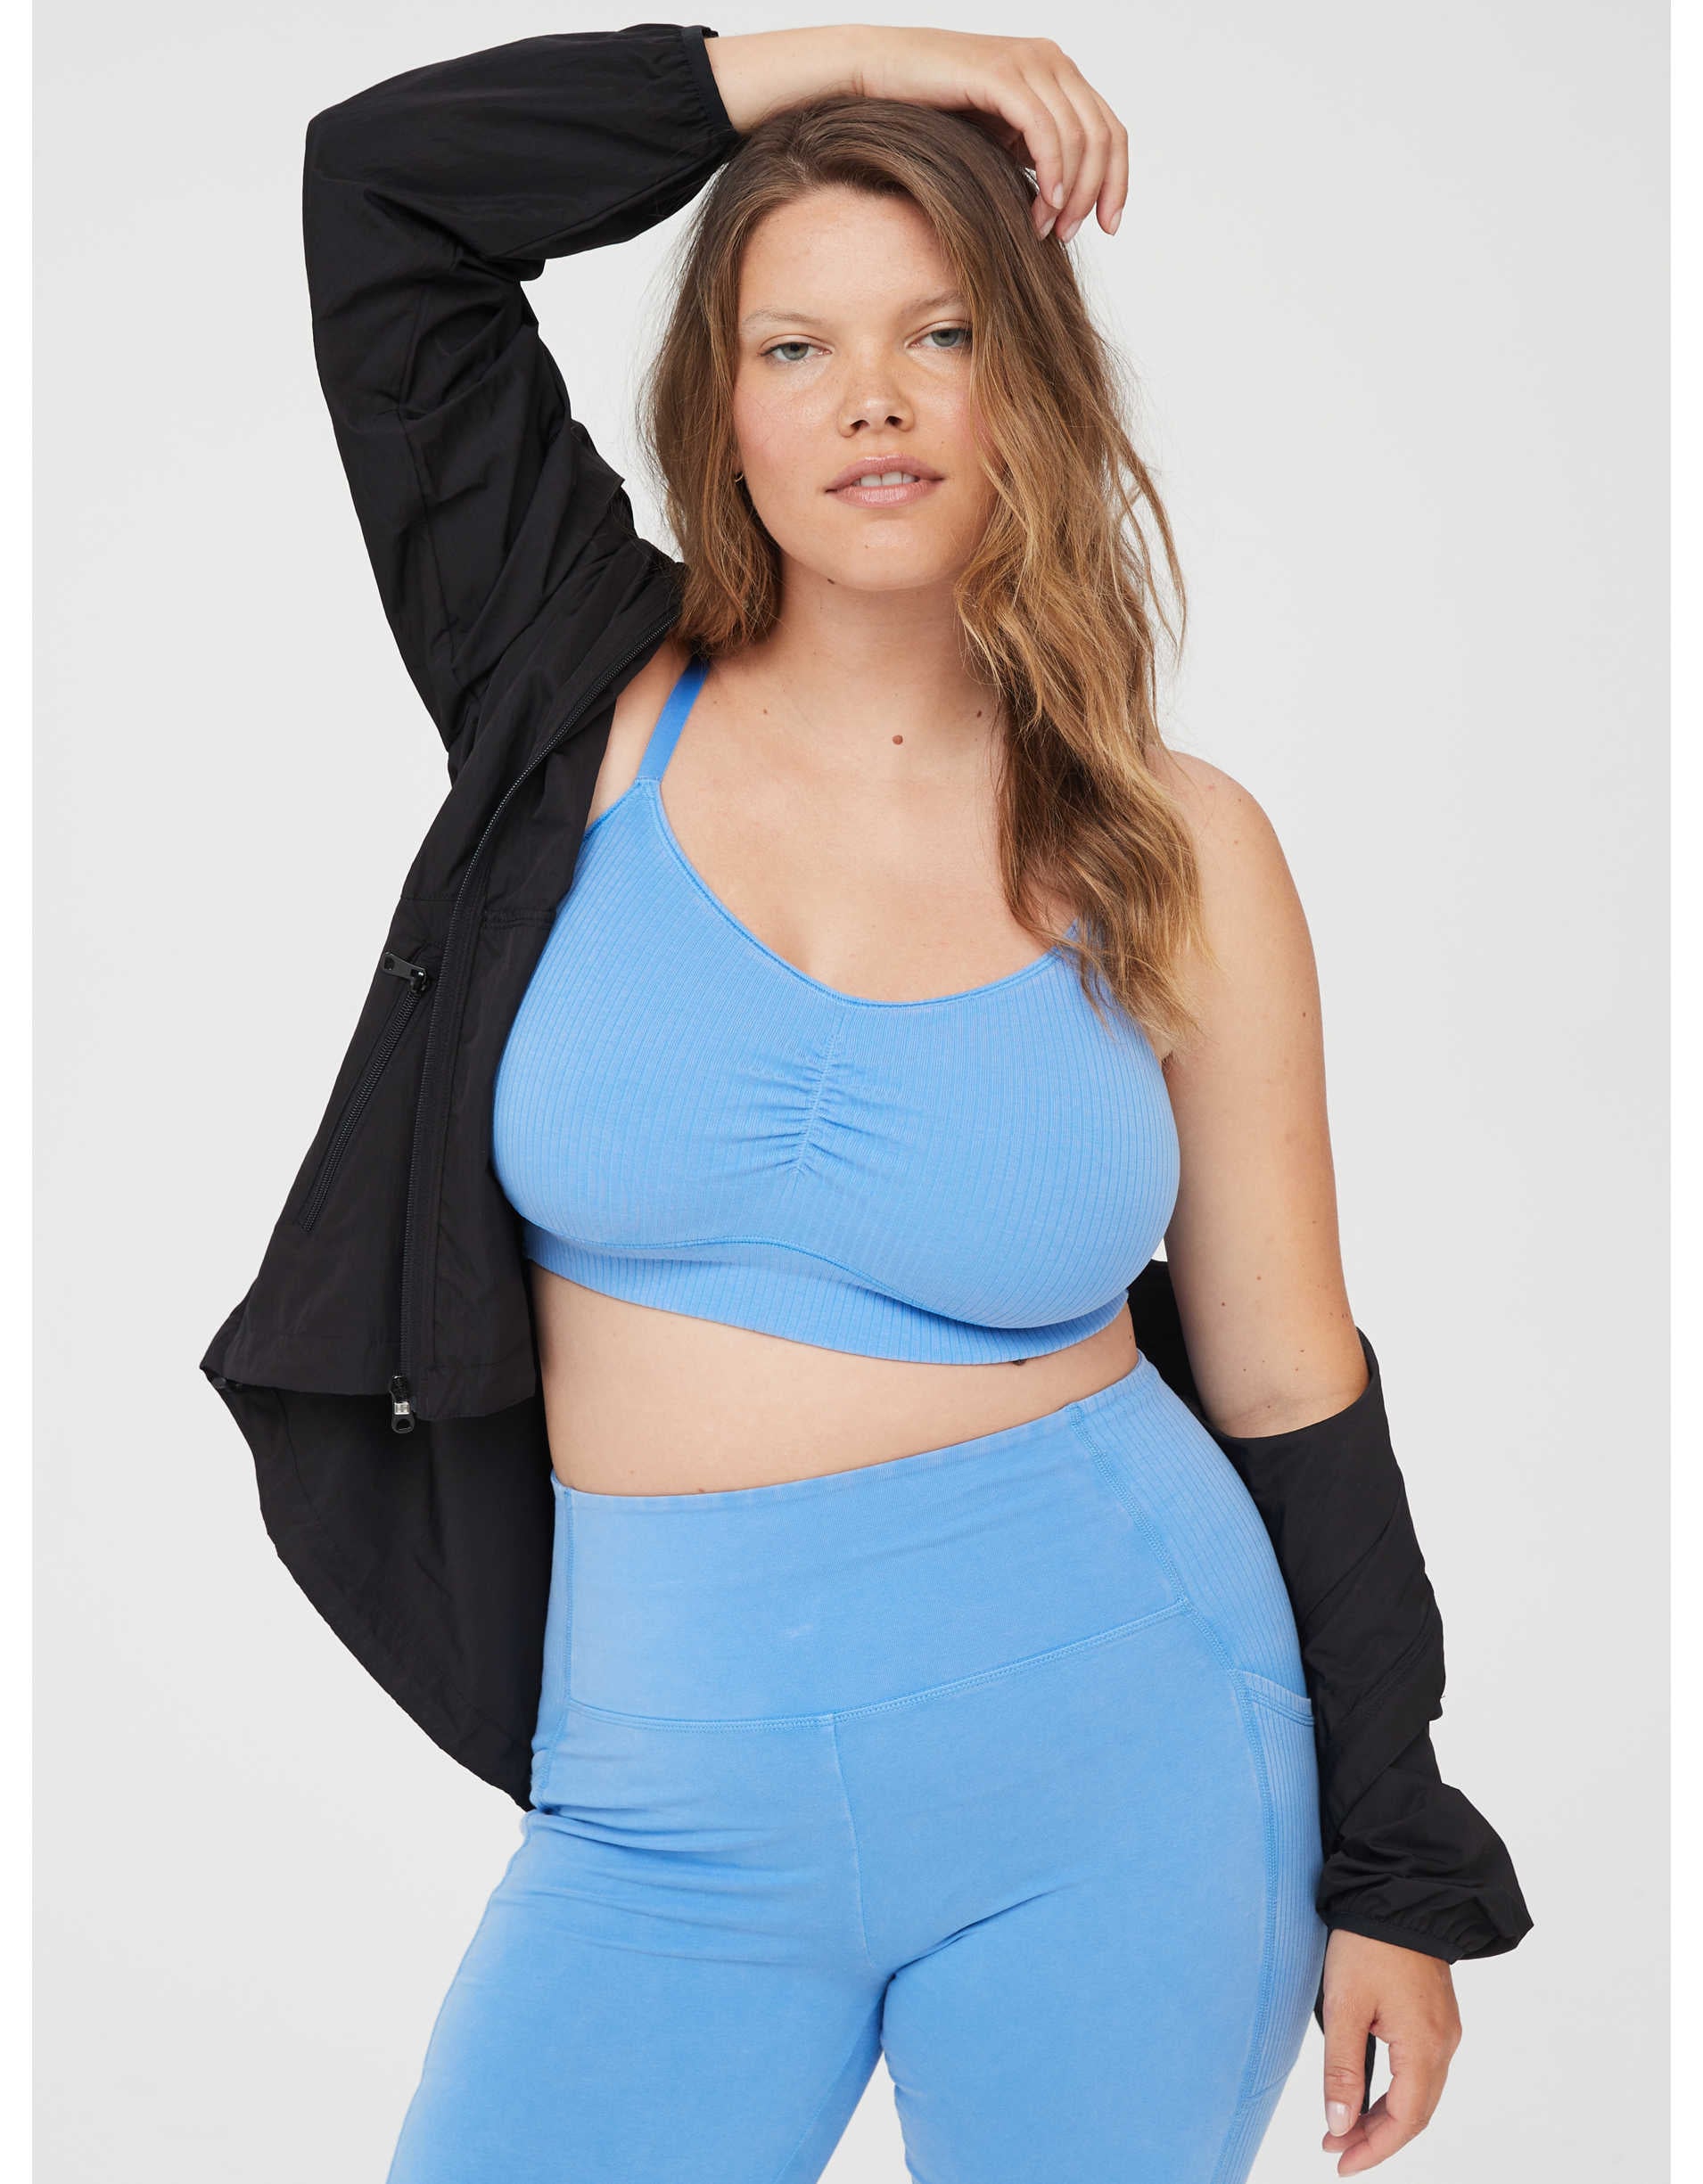 BEFORE YOU PURCHASE Aerie Offline Leggings + Sports Bra: A Review 